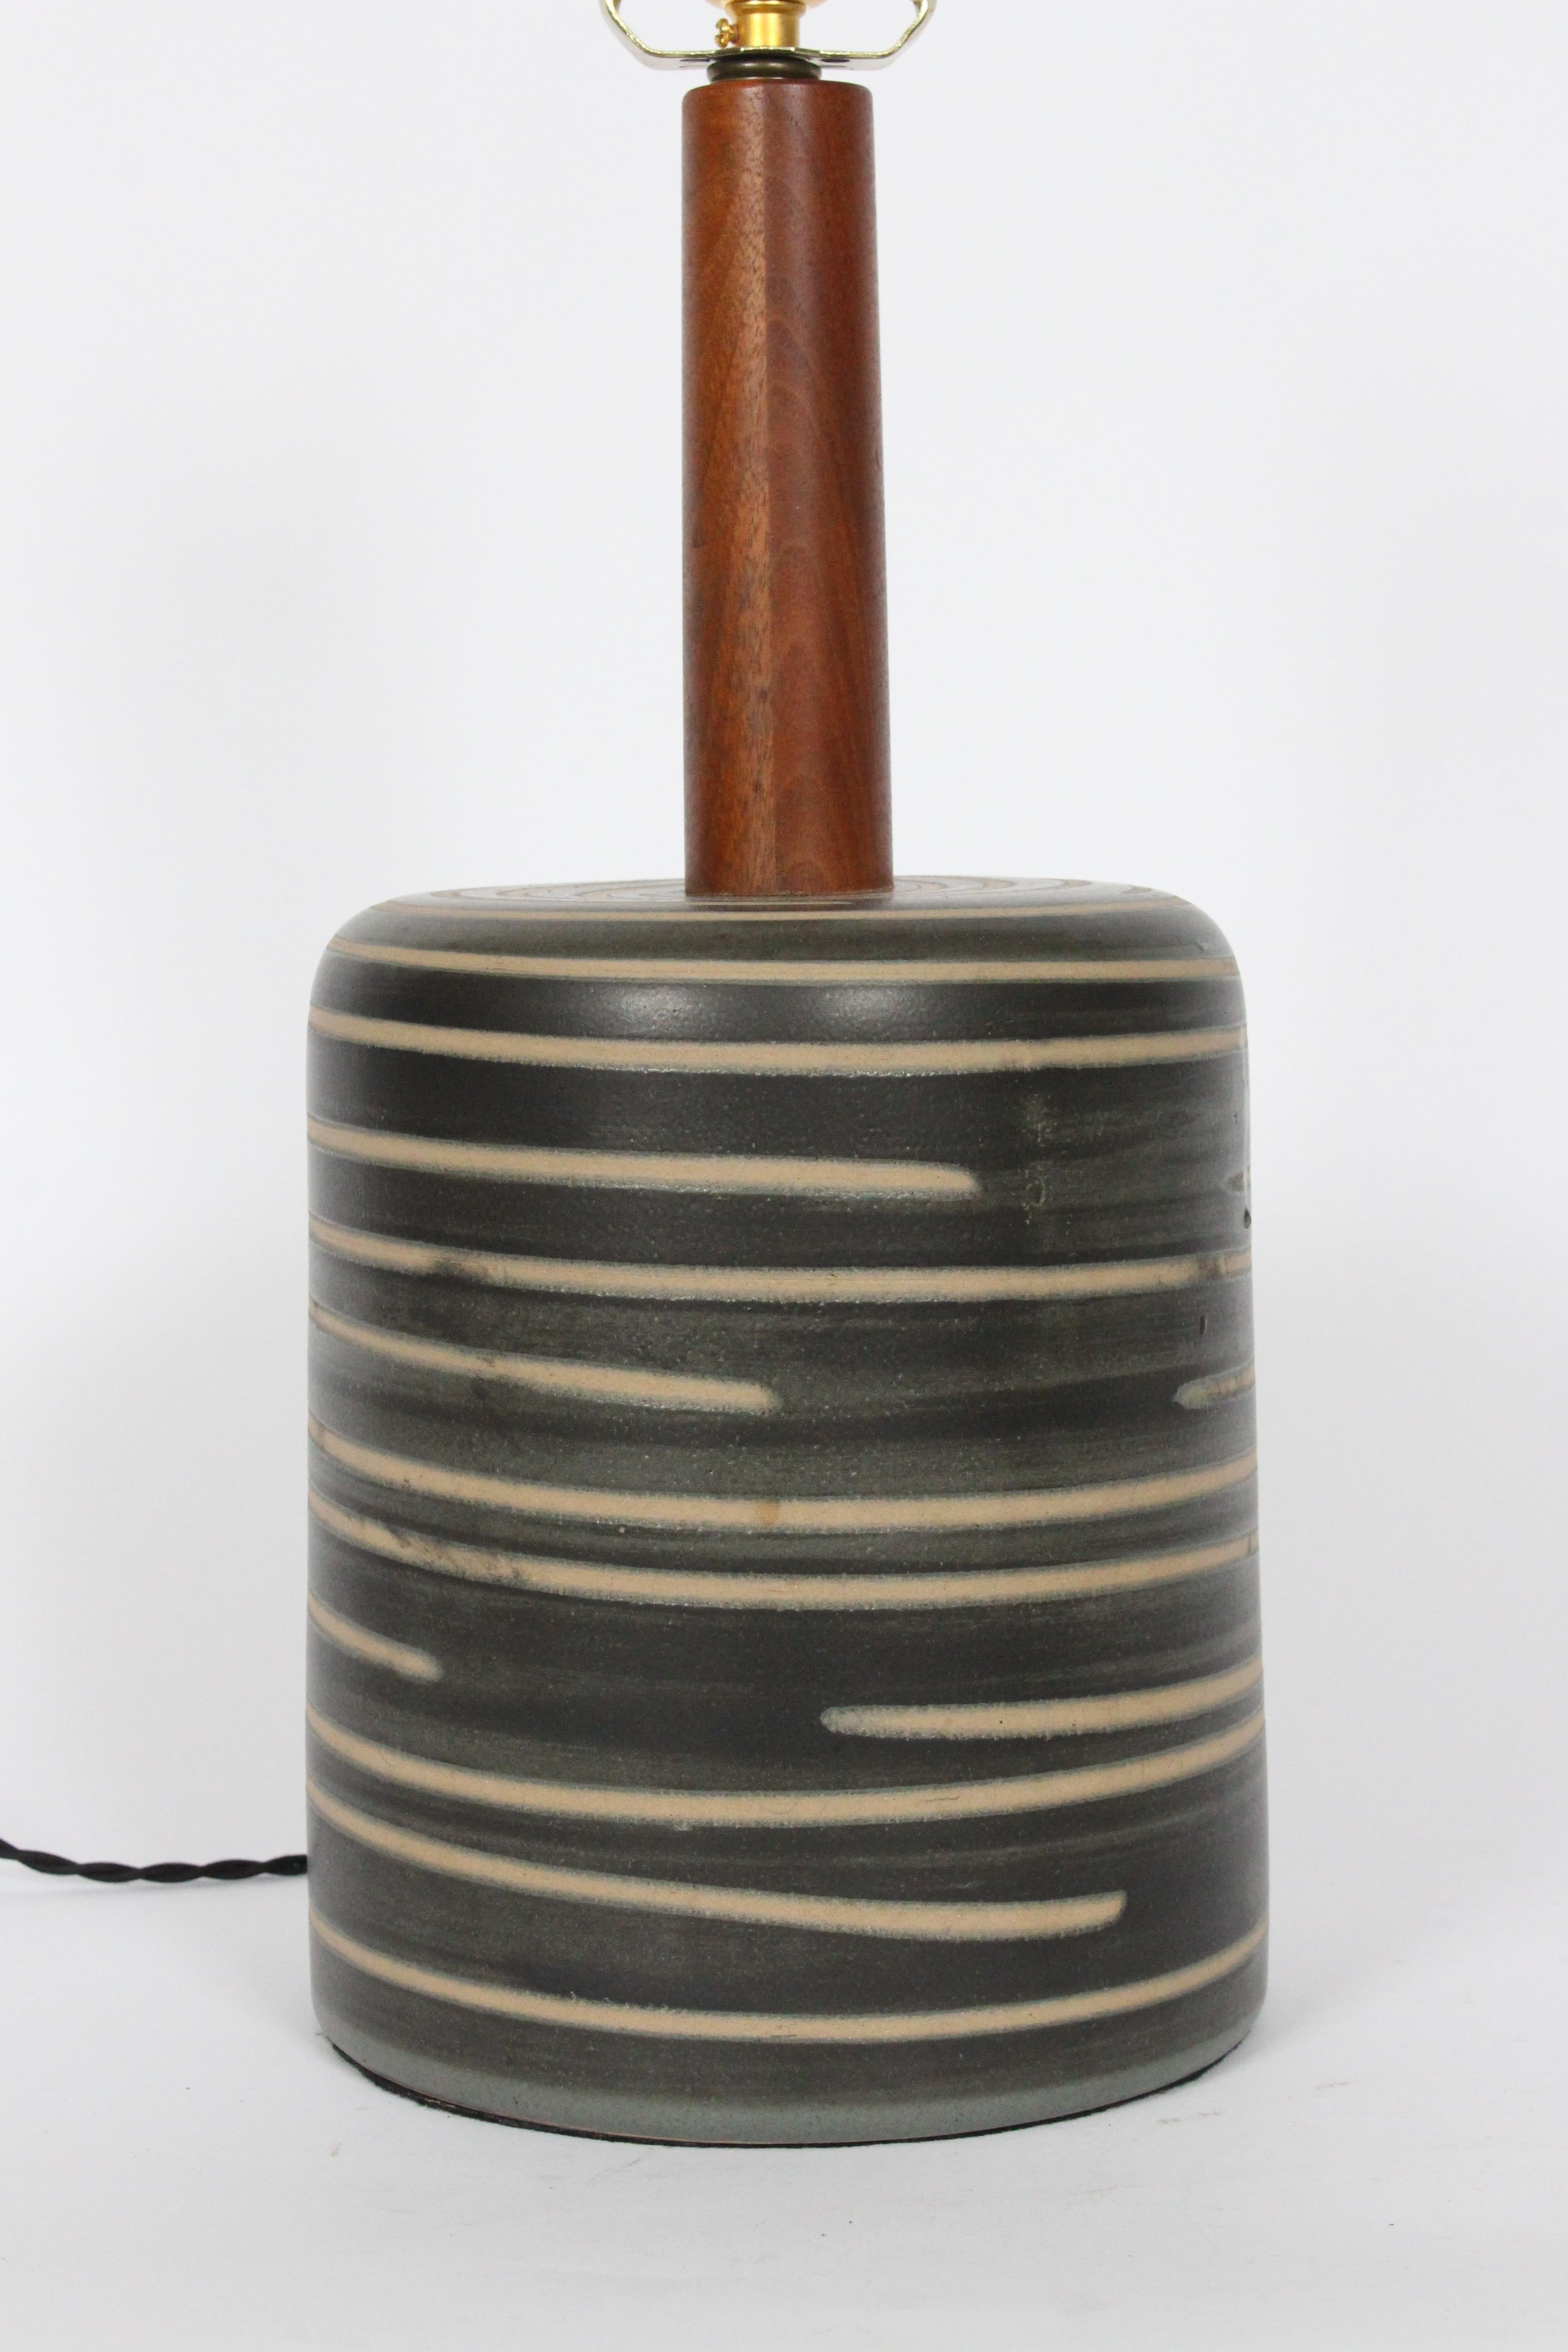 Jane & Gordon Martz Olive & Tan Banded Pottery Table Lamp In Good Condition For Sale In Bainbridge, NY